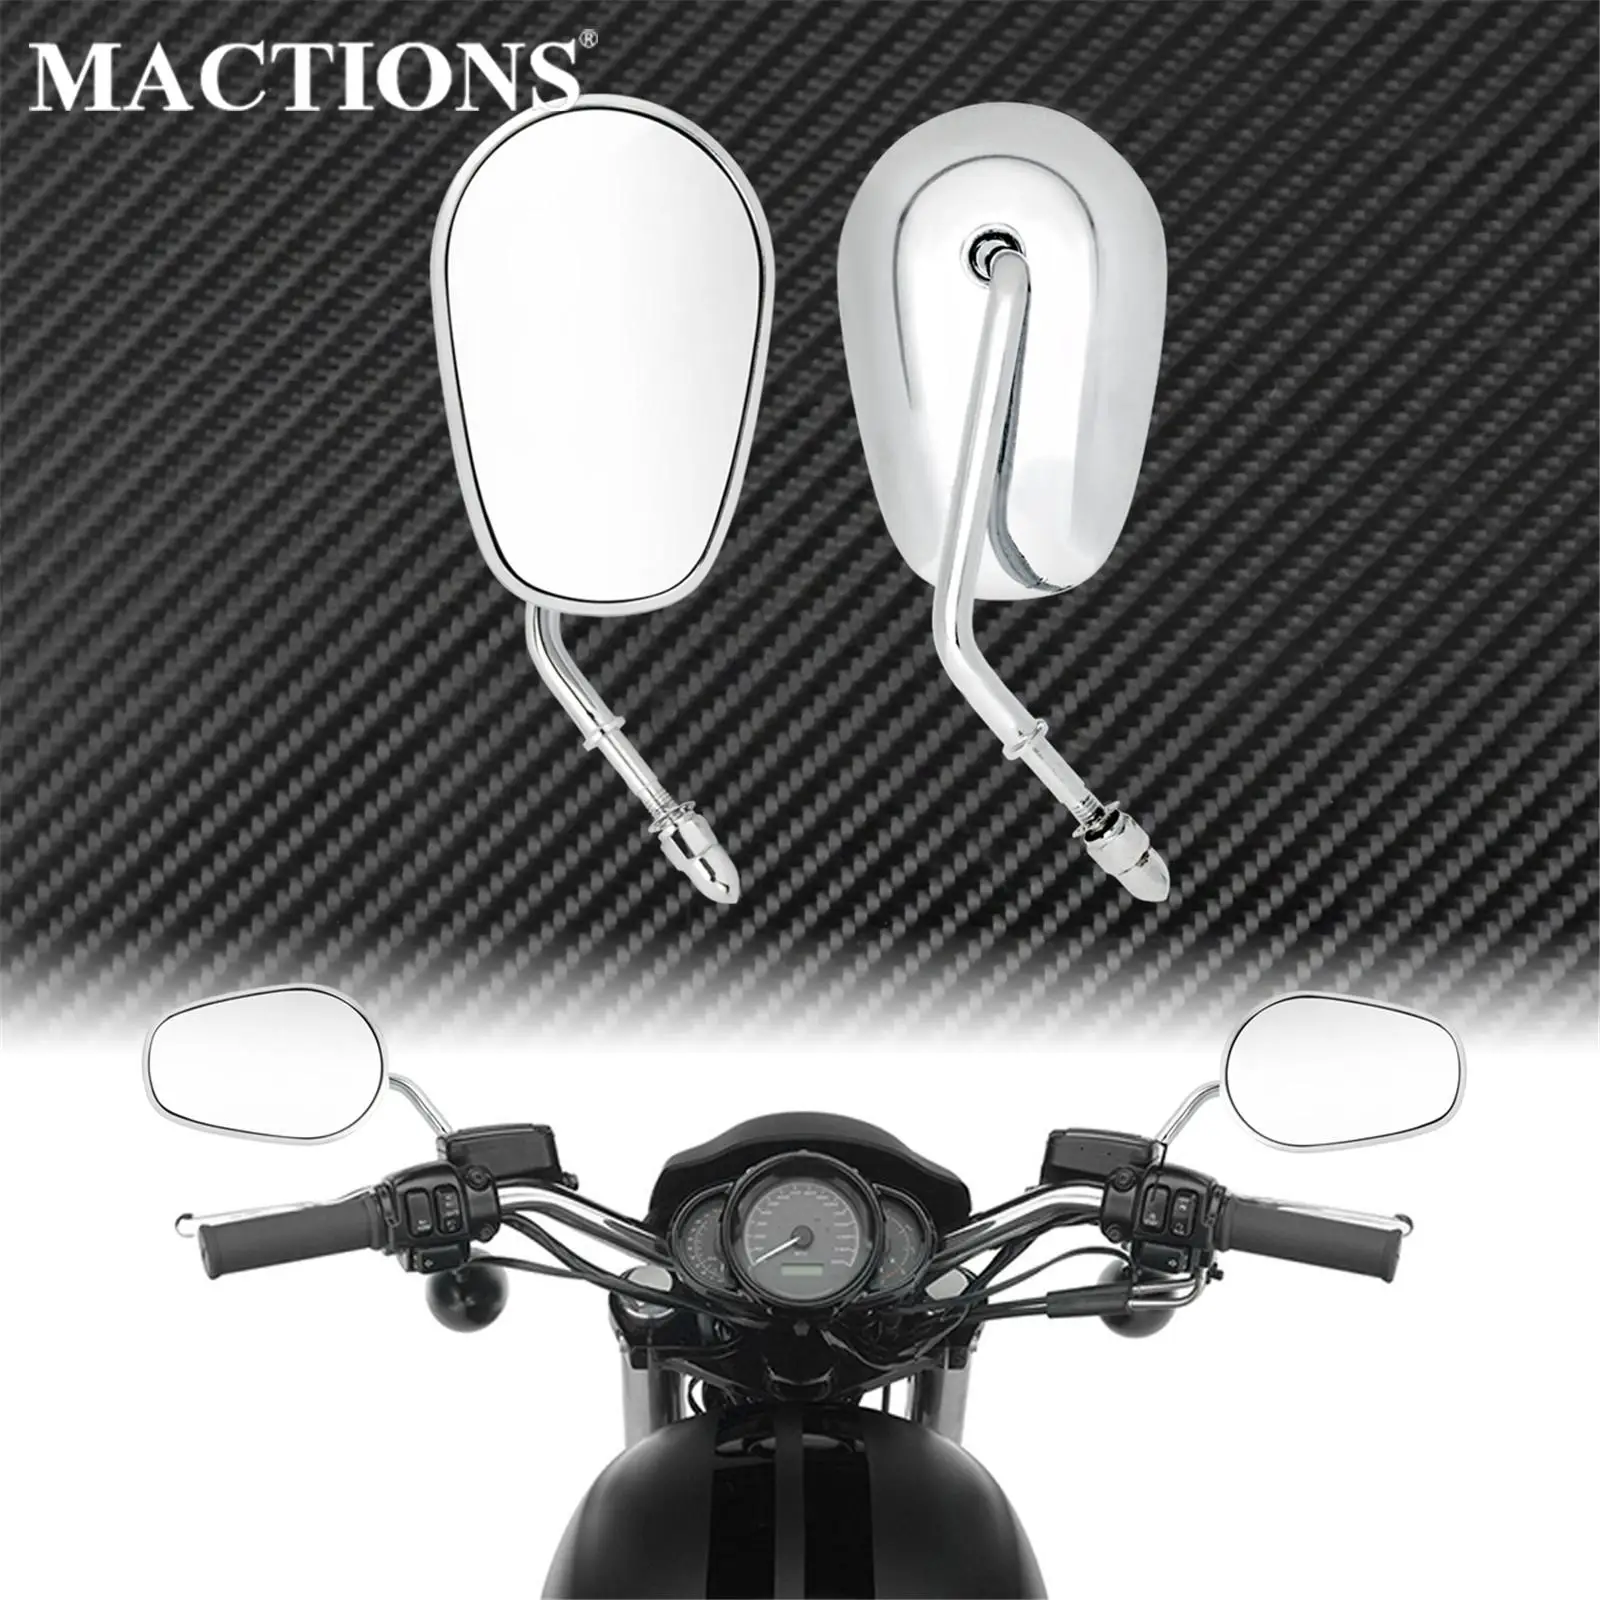 

2xMotorcycle Chrome Rear View Side Mirrors For Harley Sportster Dyna Softail Touring Road King XL 883 48 Fatboy Bobber Chopper